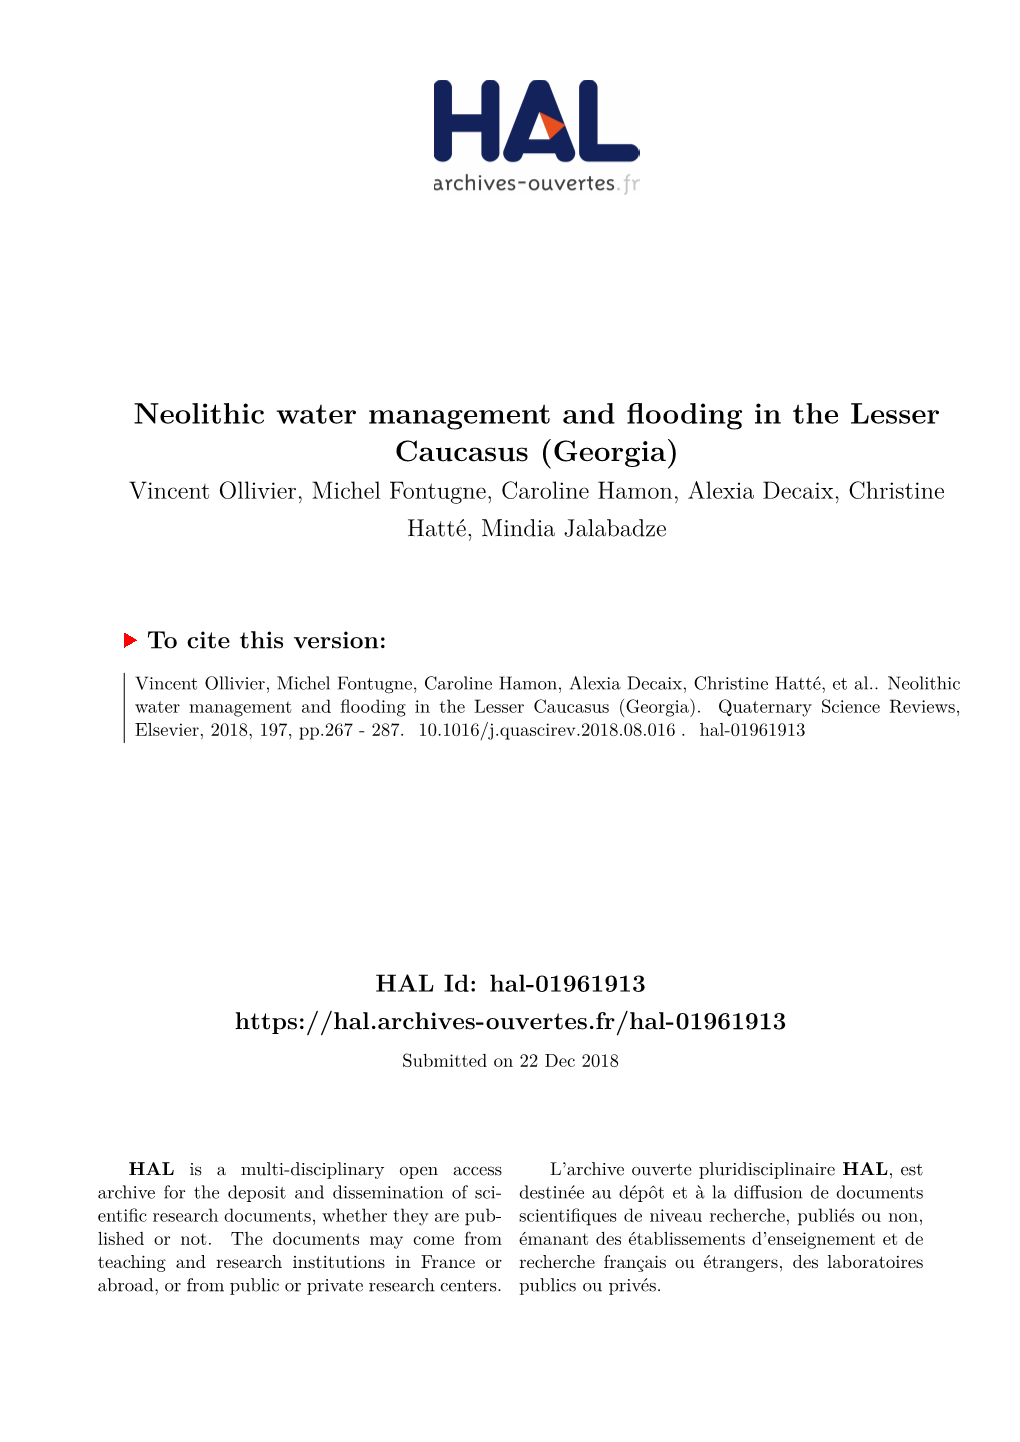 Neolithic Water Management and Flooding in the Lesser Caucasus